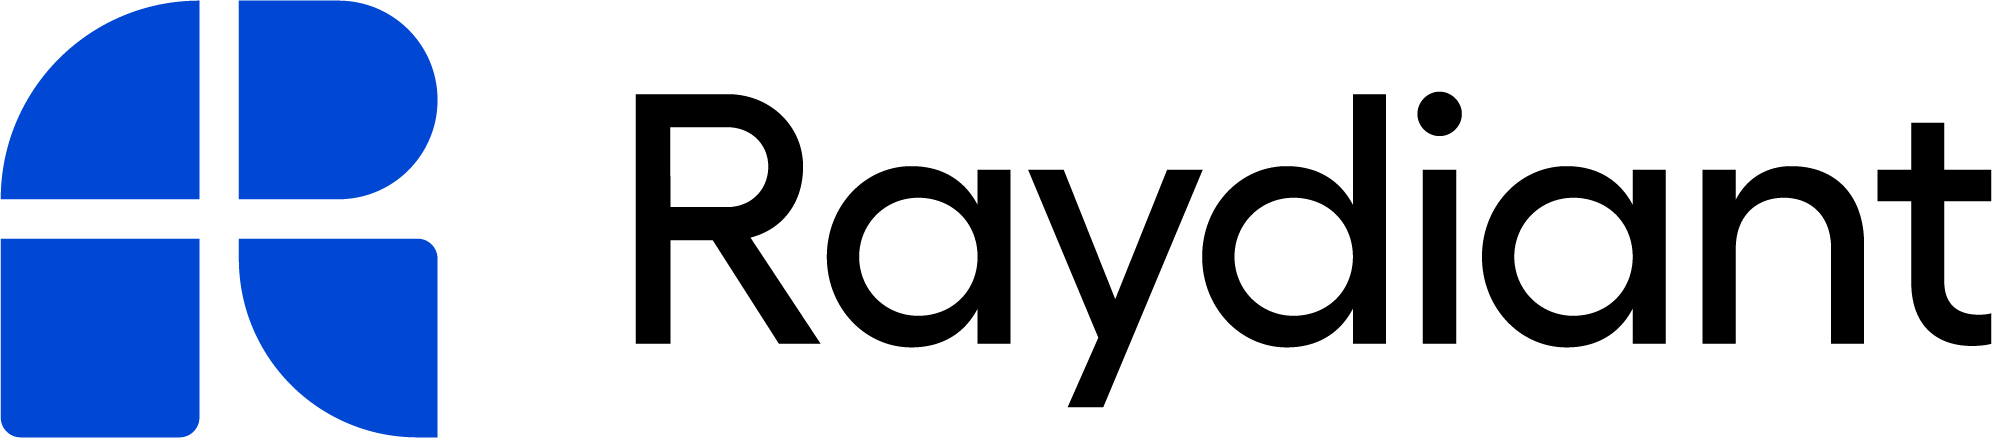 Raydiant - Chief Revenue Officer